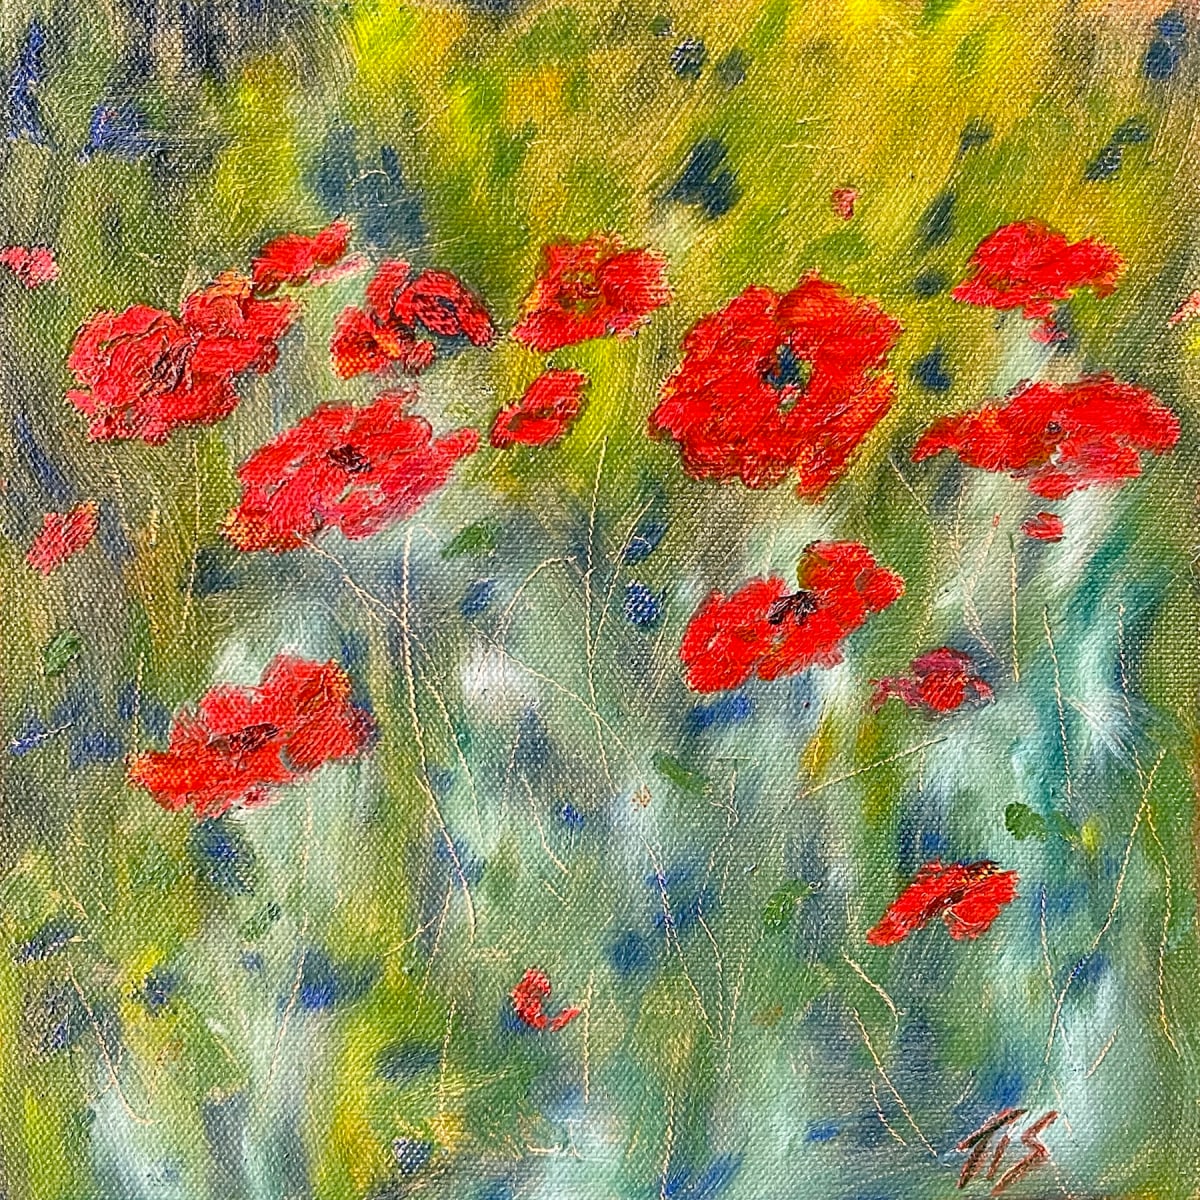 Red Poppies (sketch) by Thomas Stevens 